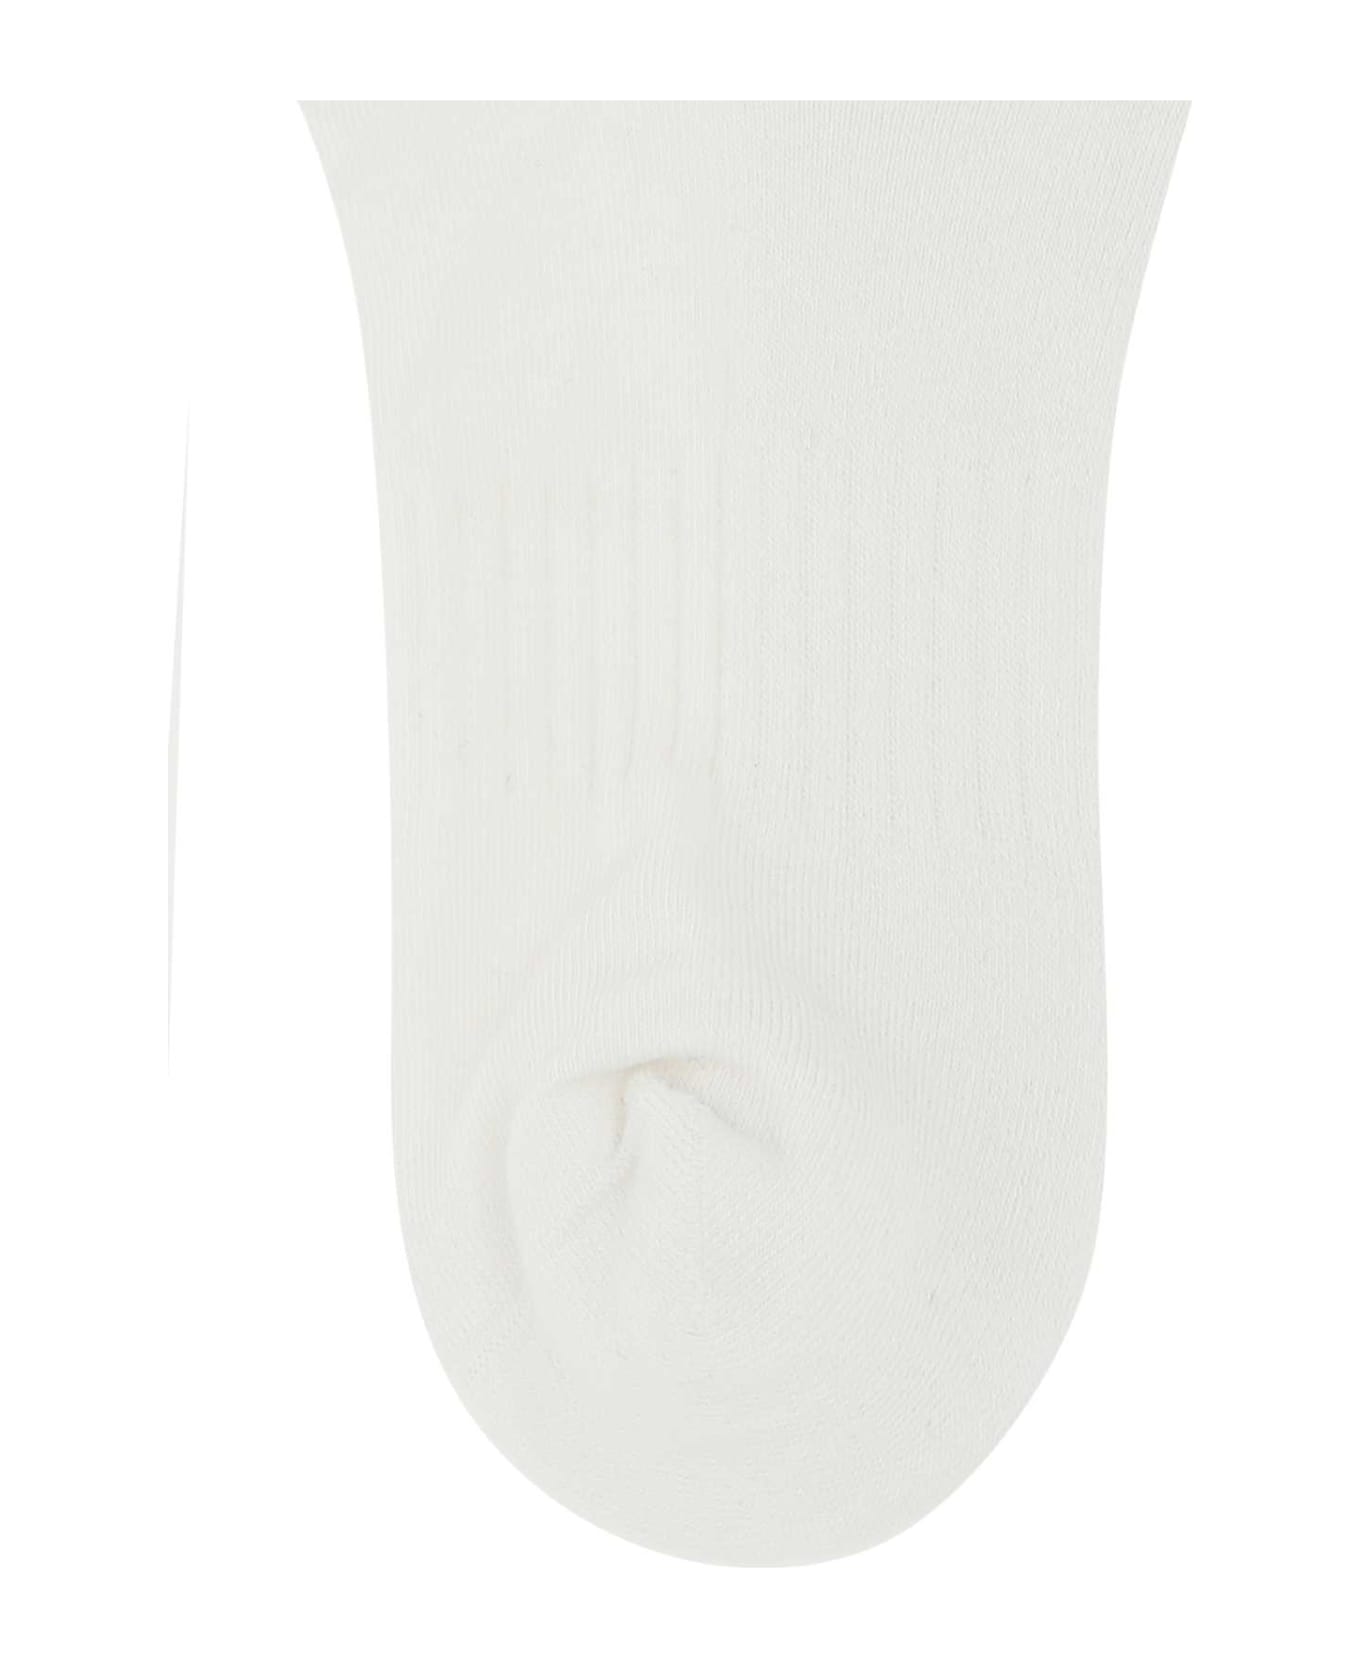 Burberry White Stretch Polyester Blend Socks - A1464 靴下＆タイツ